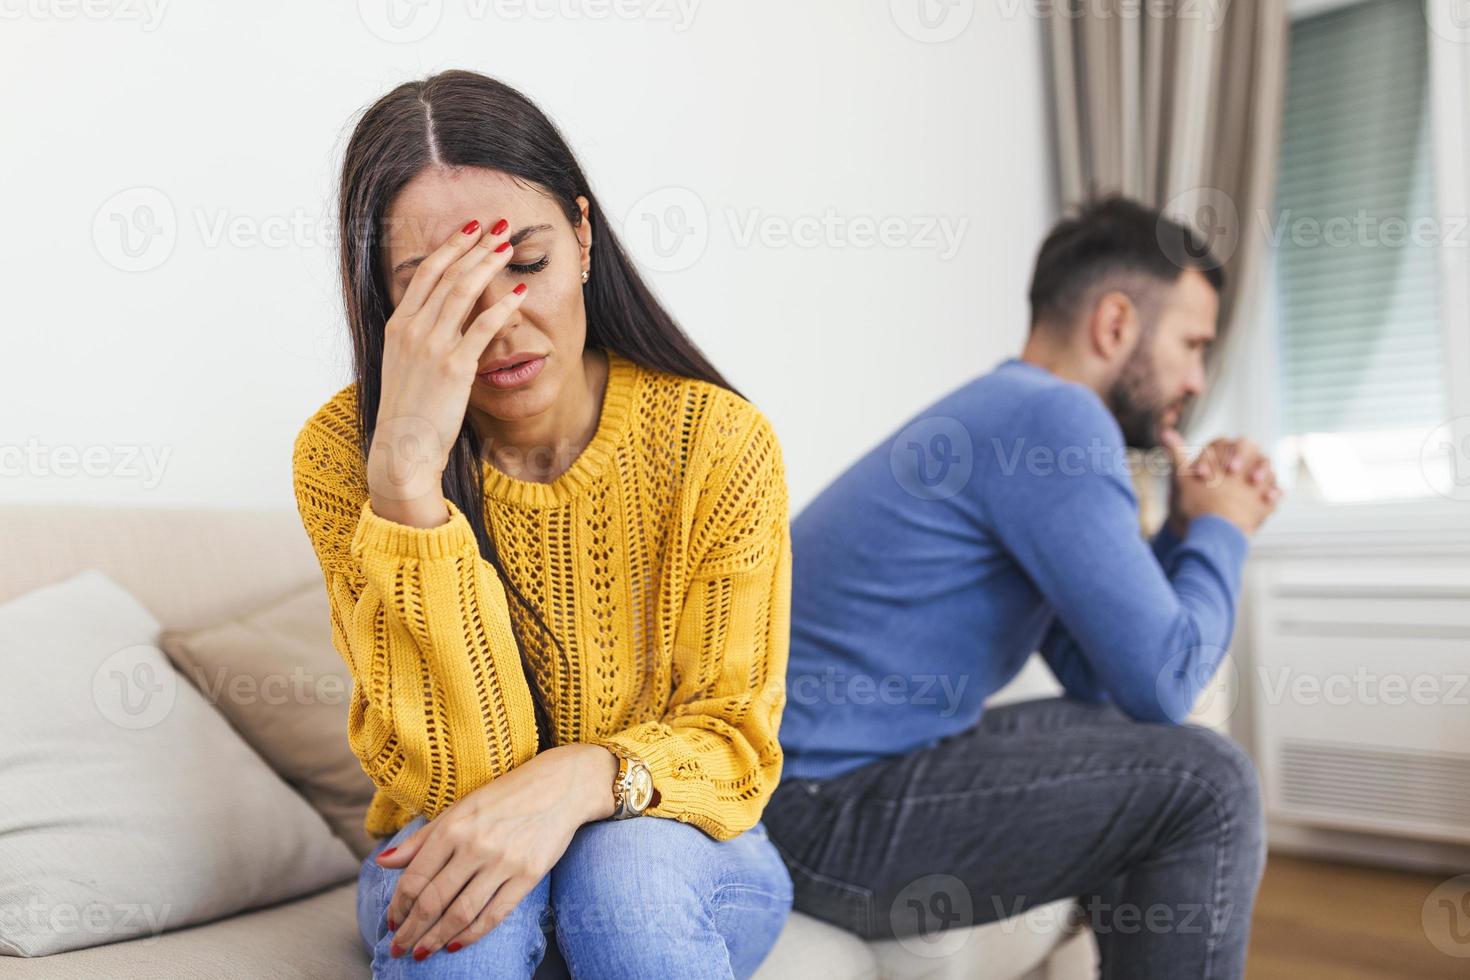 Married couple sitting together not looking at each other on couch in living room at home after quarrel. Angry husband frustrated wife. Break up, problems trouble in relationship concept photo